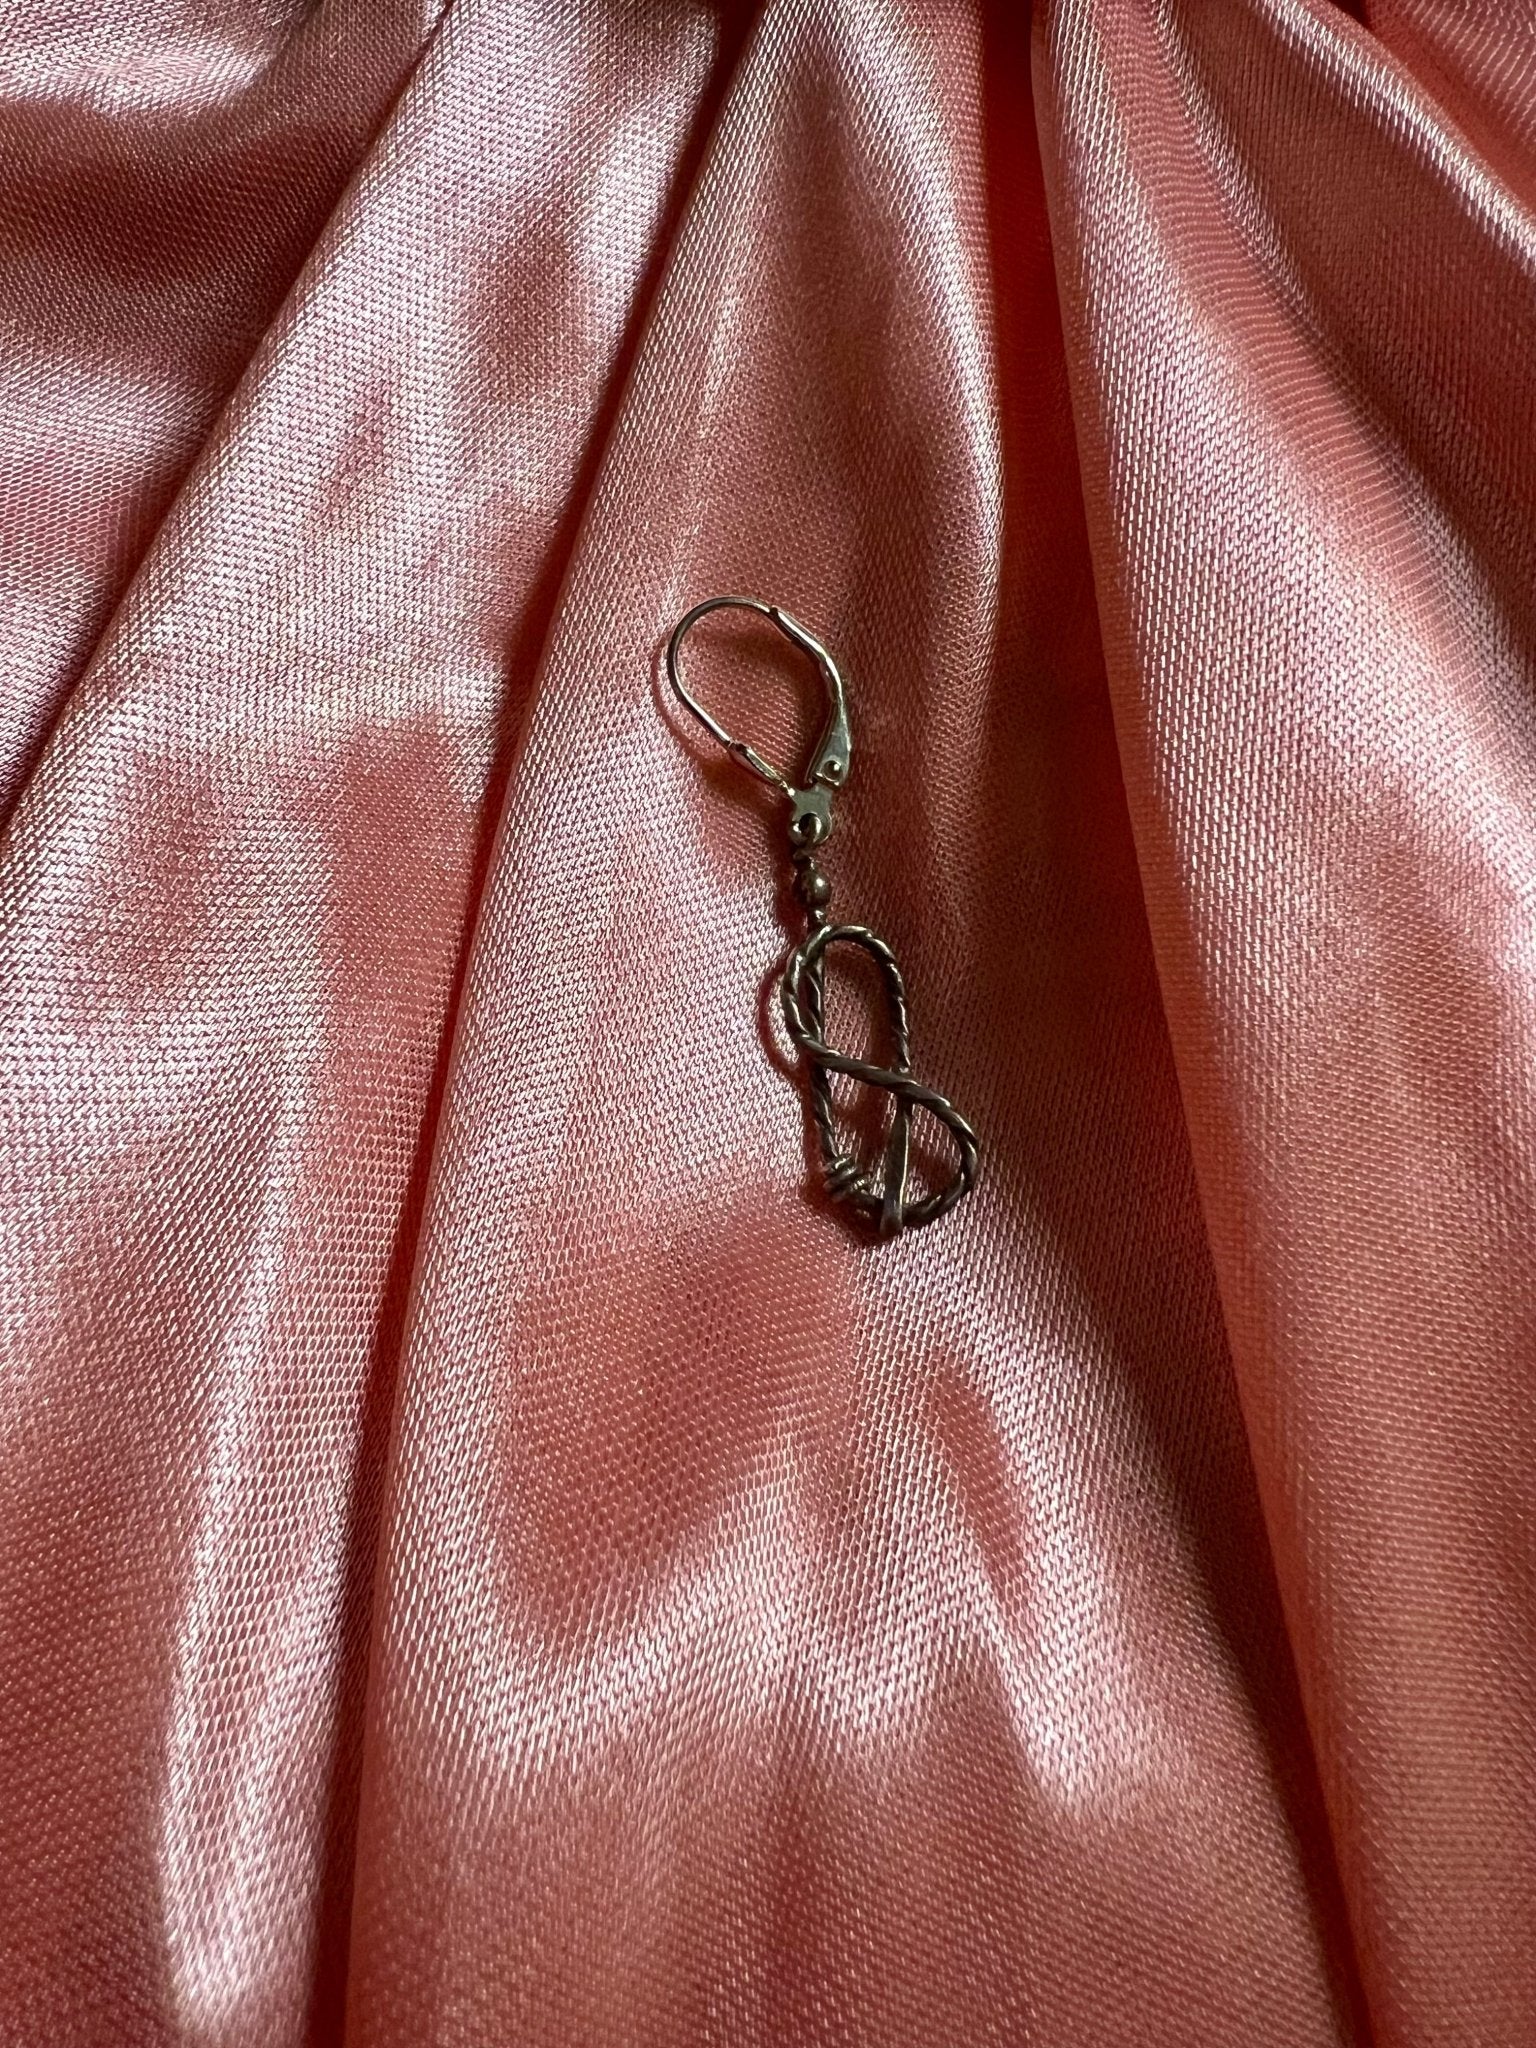 Vintage Sterling Silver Whip Earring - The Nightshift